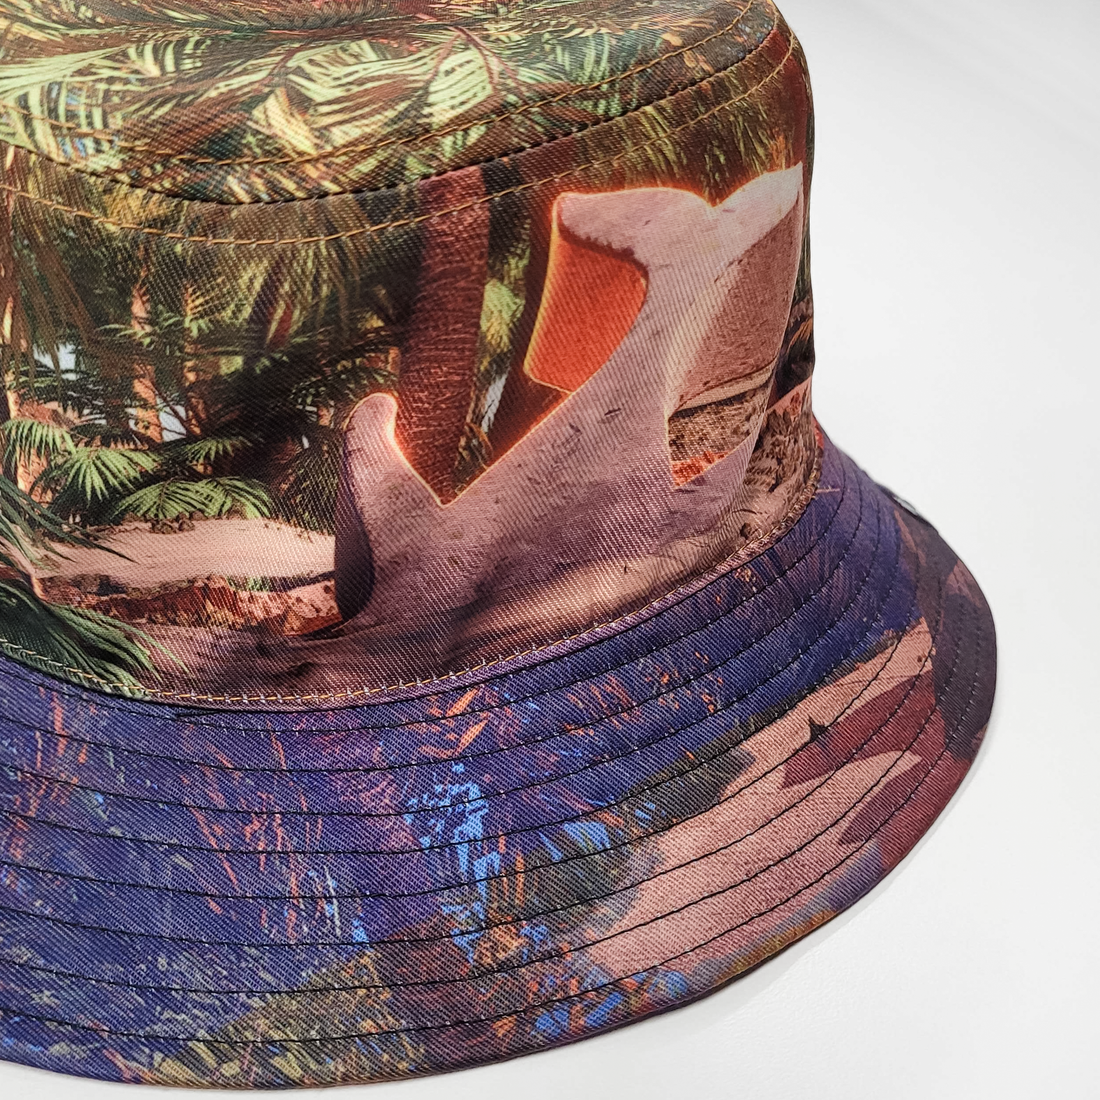 PRE SALE - WHALES - Two Worlds Apart Bucket Hat